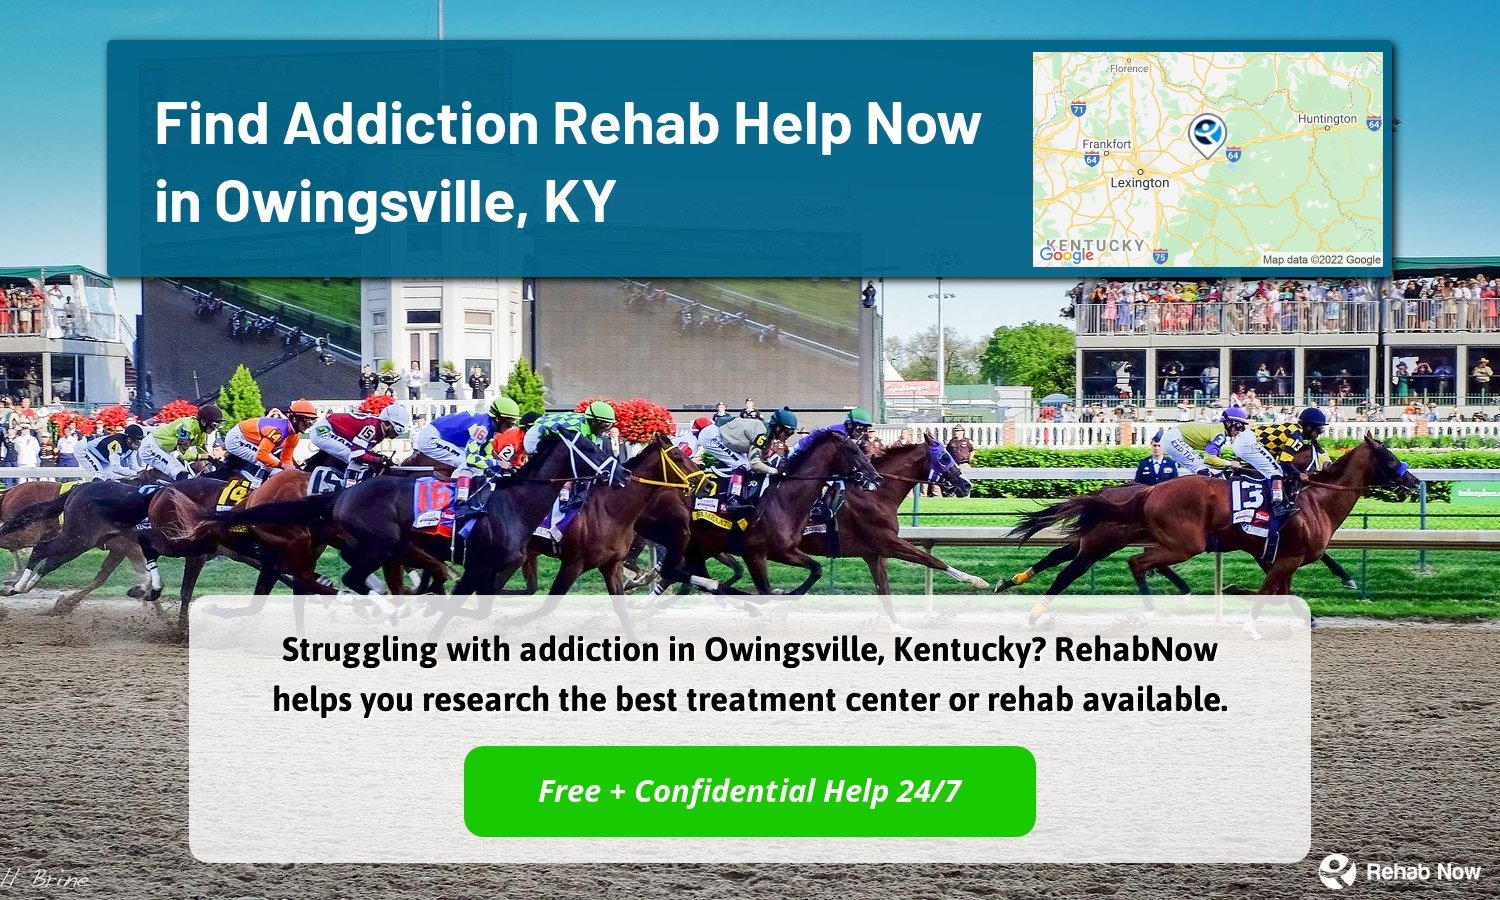 Struggling with addiction in Owingsville, Kentucky? RehabNow helps you research the best treatment center or rehab available.